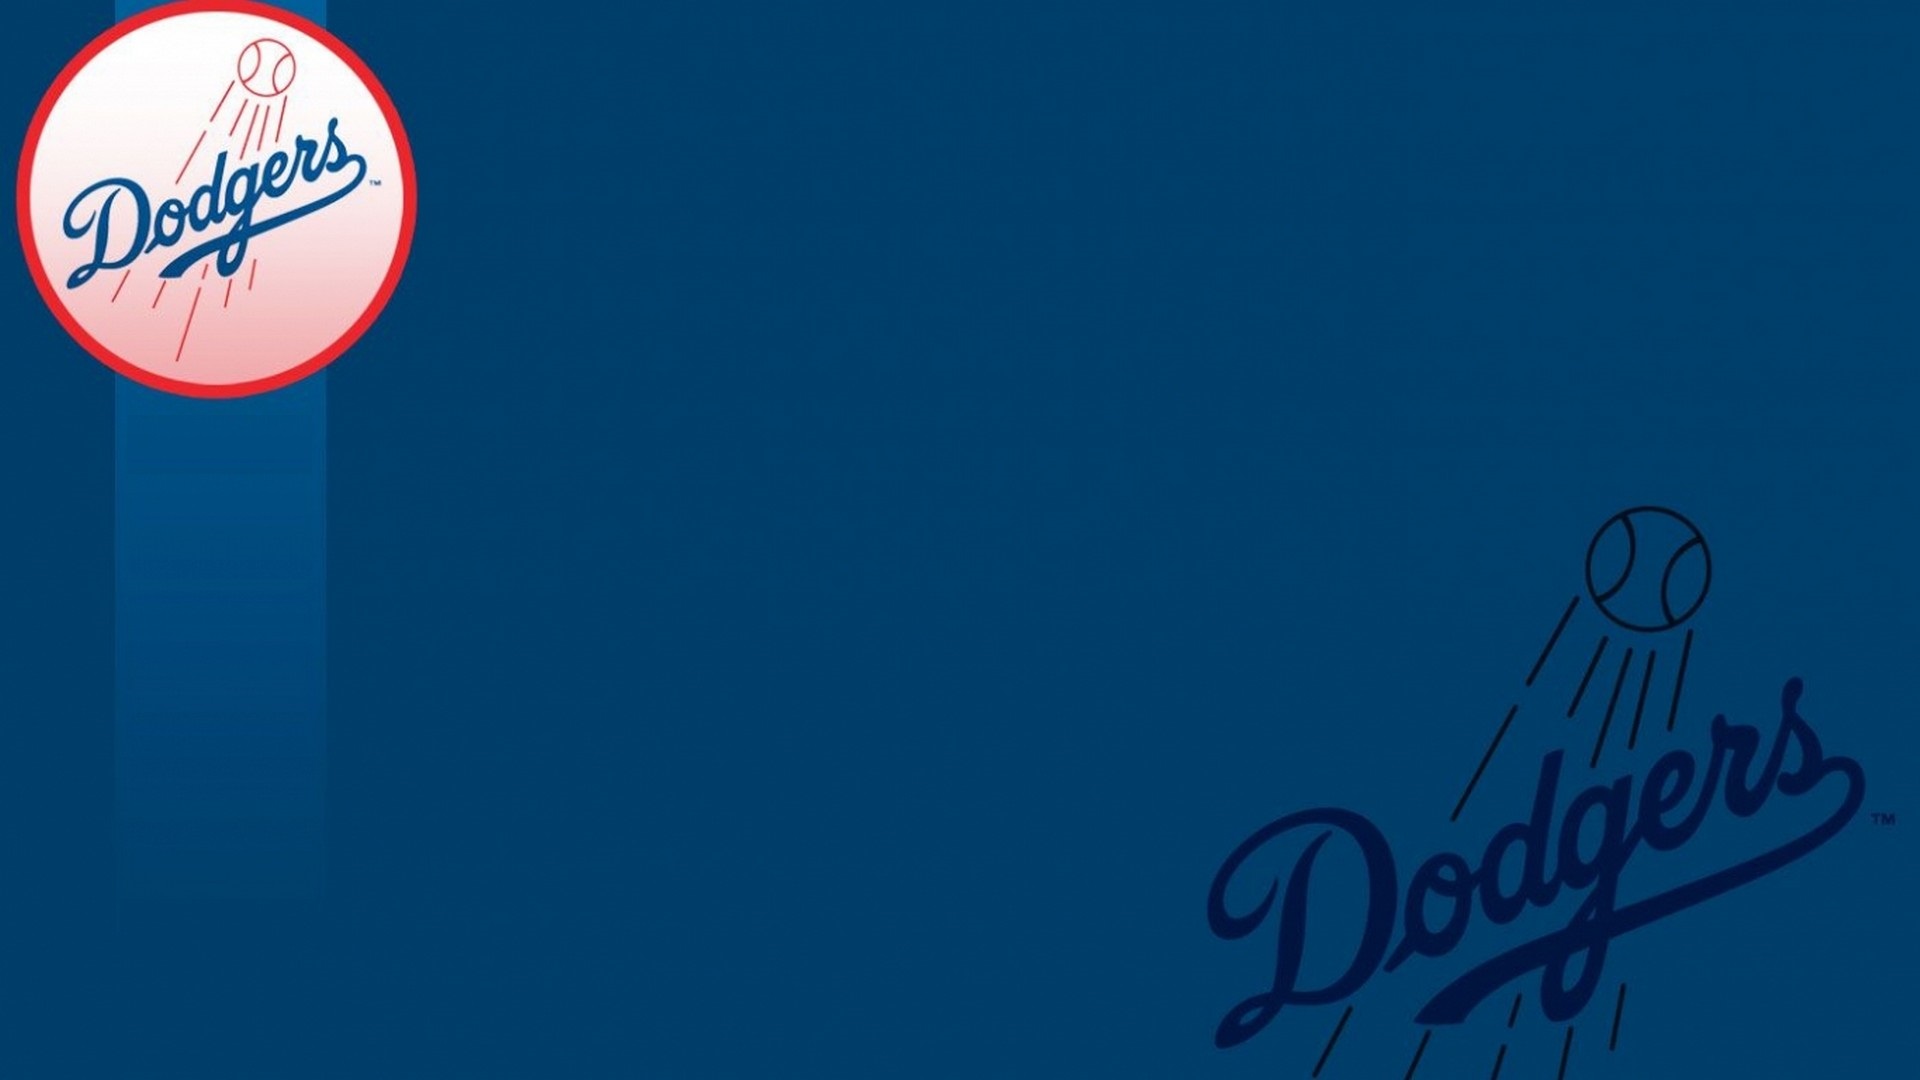 Backgrounds Los Angeles Dodgers MLB HD With high-resolution 1920X1080 pixel. You can use this wallpaper for Mac Desktop Wallpaper, Laptop Screensavers, Android Wallpapers, Tablet or iPhone Home Screen and another mobile phone device